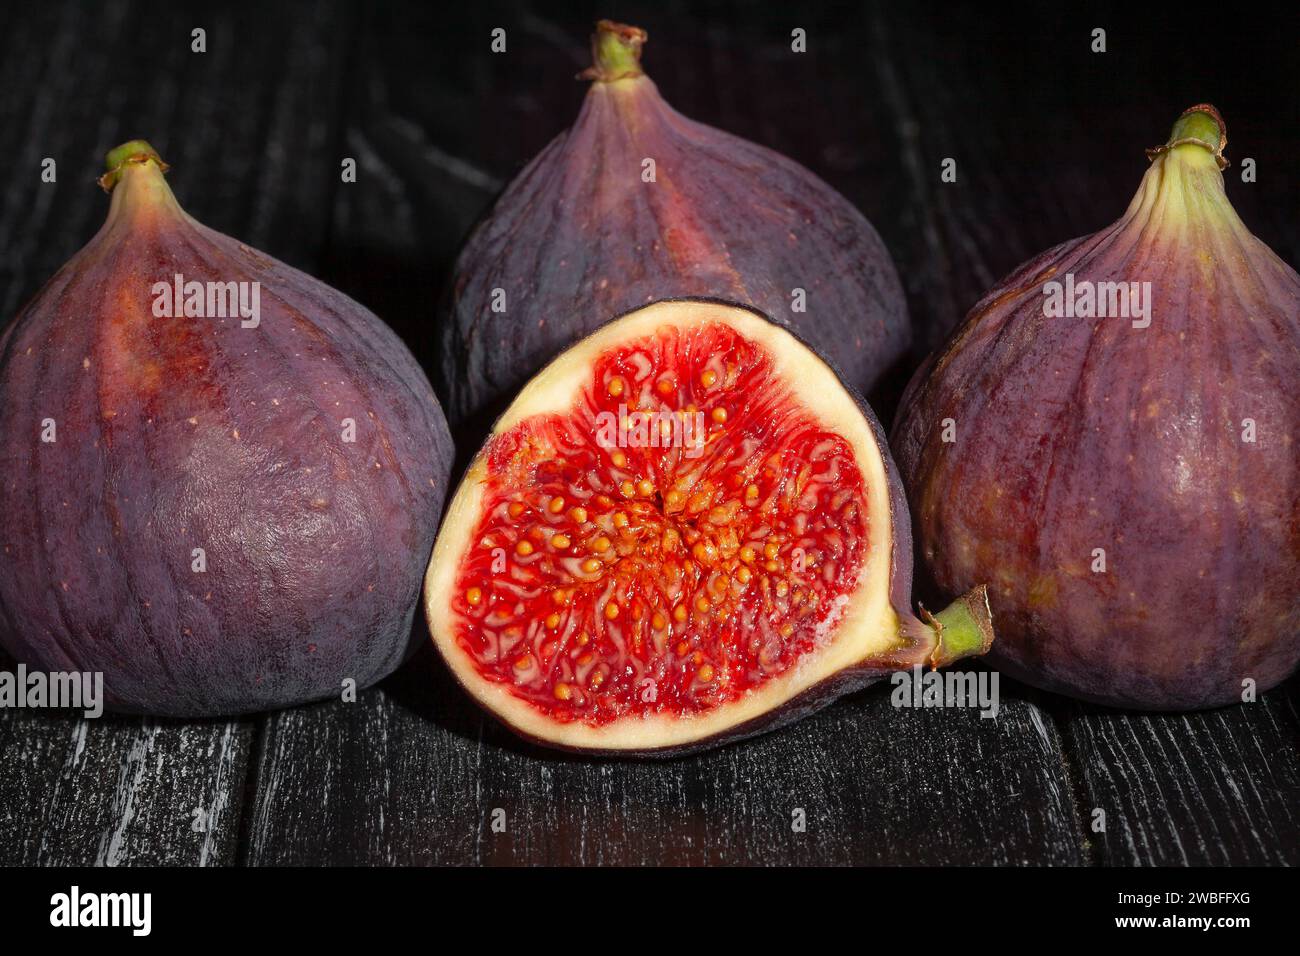 sliced figs on wood background Stock Photo